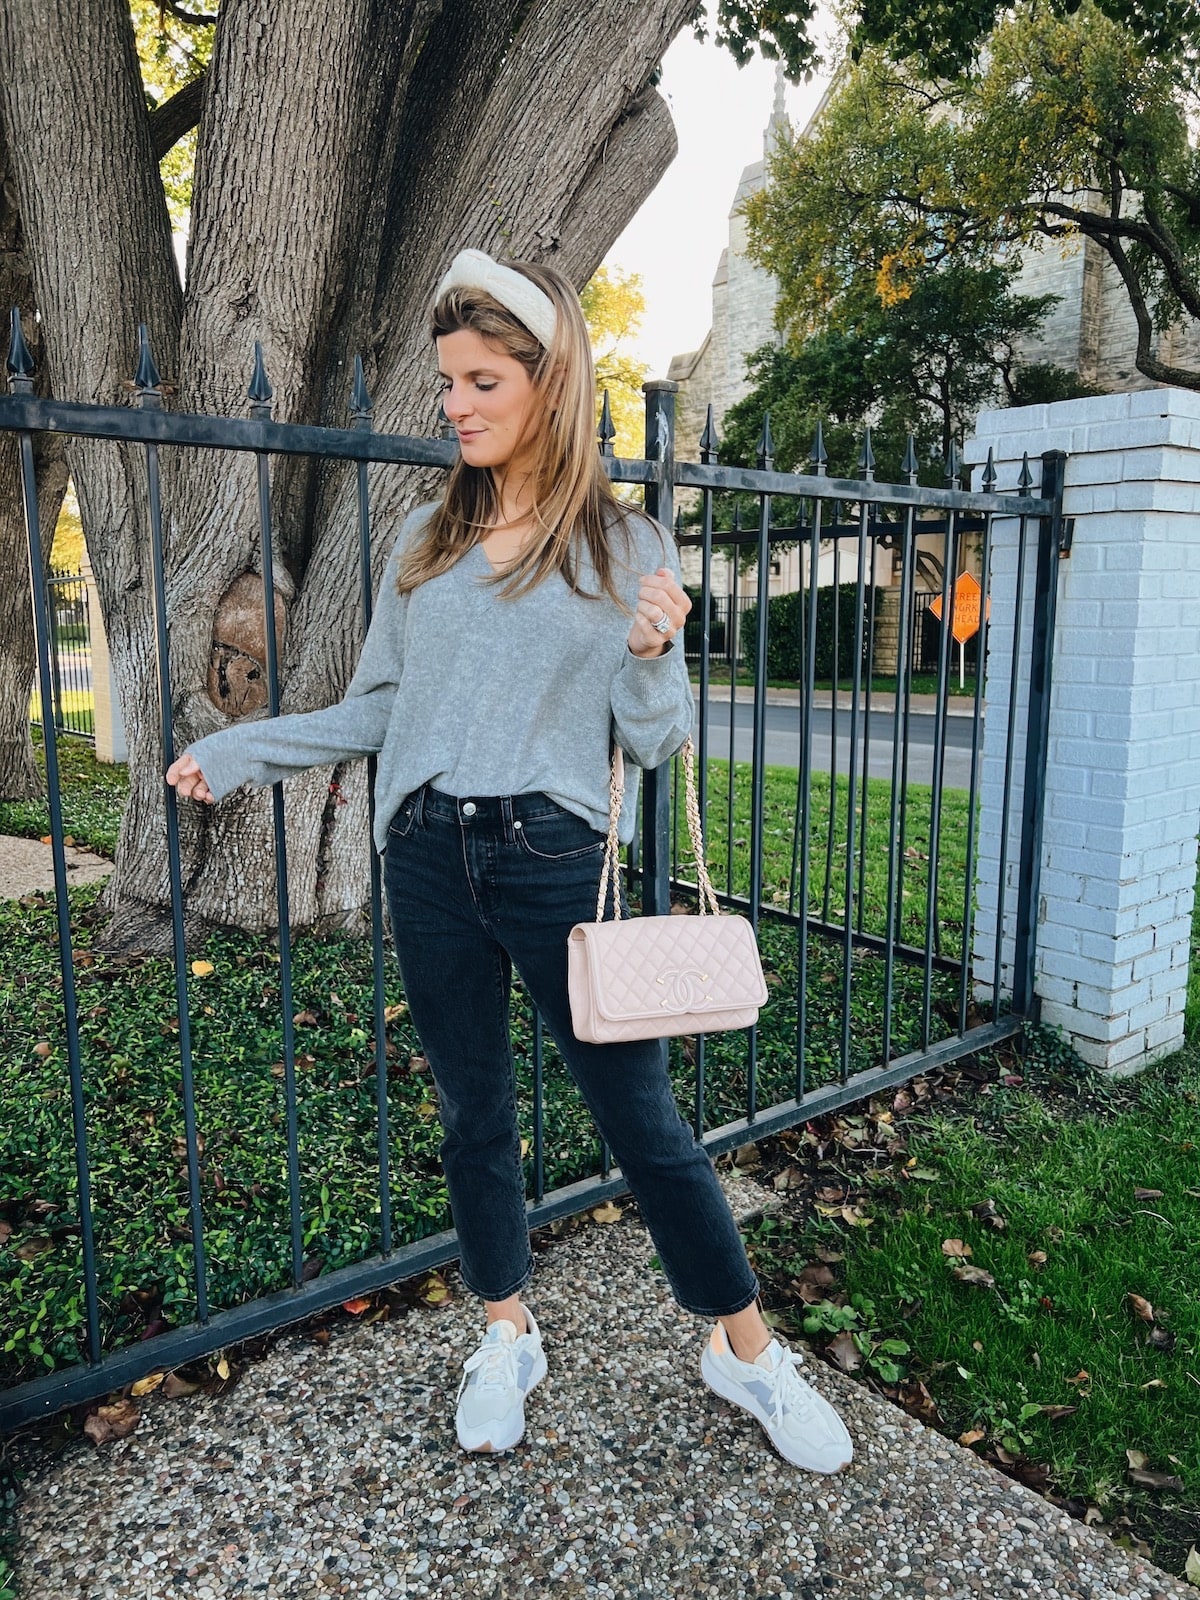 Brighton Butler wearing ParrishLA grey sweater and madewell jeans with new balance sneakers